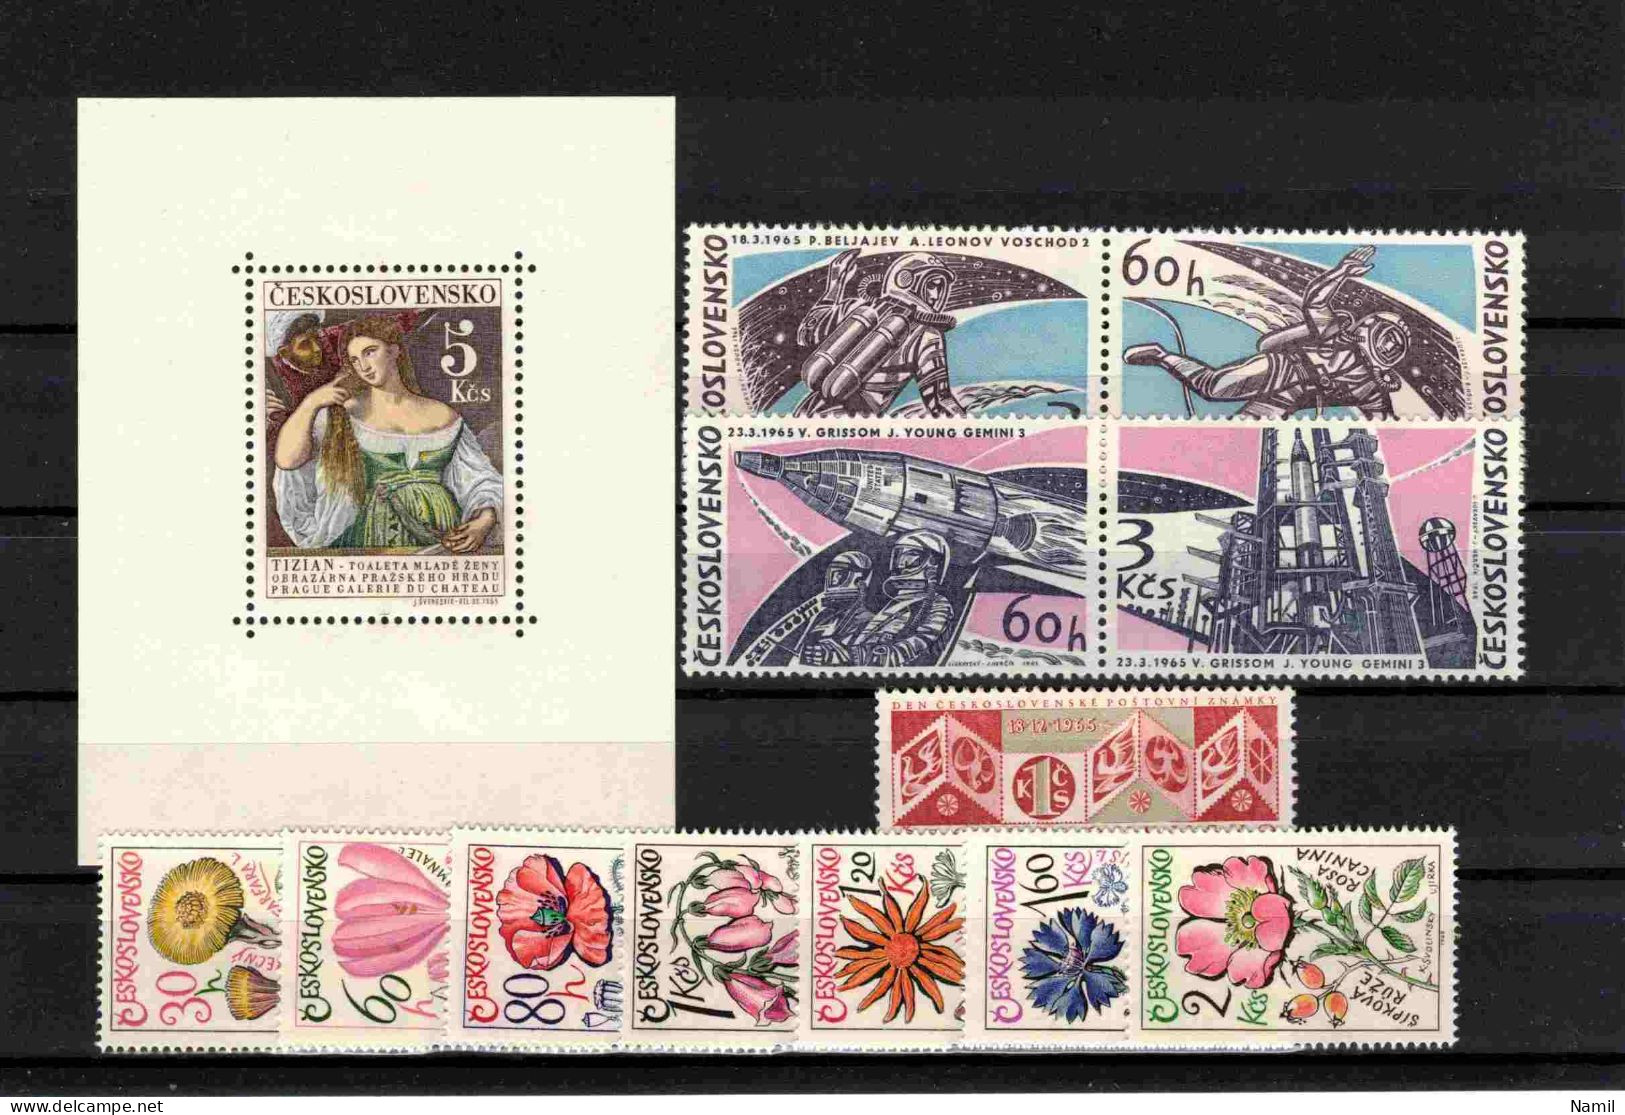 * Tchécoslovaquie 1965 Mi 1503-90+Bl.22 (Yv 1369-1455+BF 26), (MH)* L'année Complete, Infime Trace De Charniere - Full Years